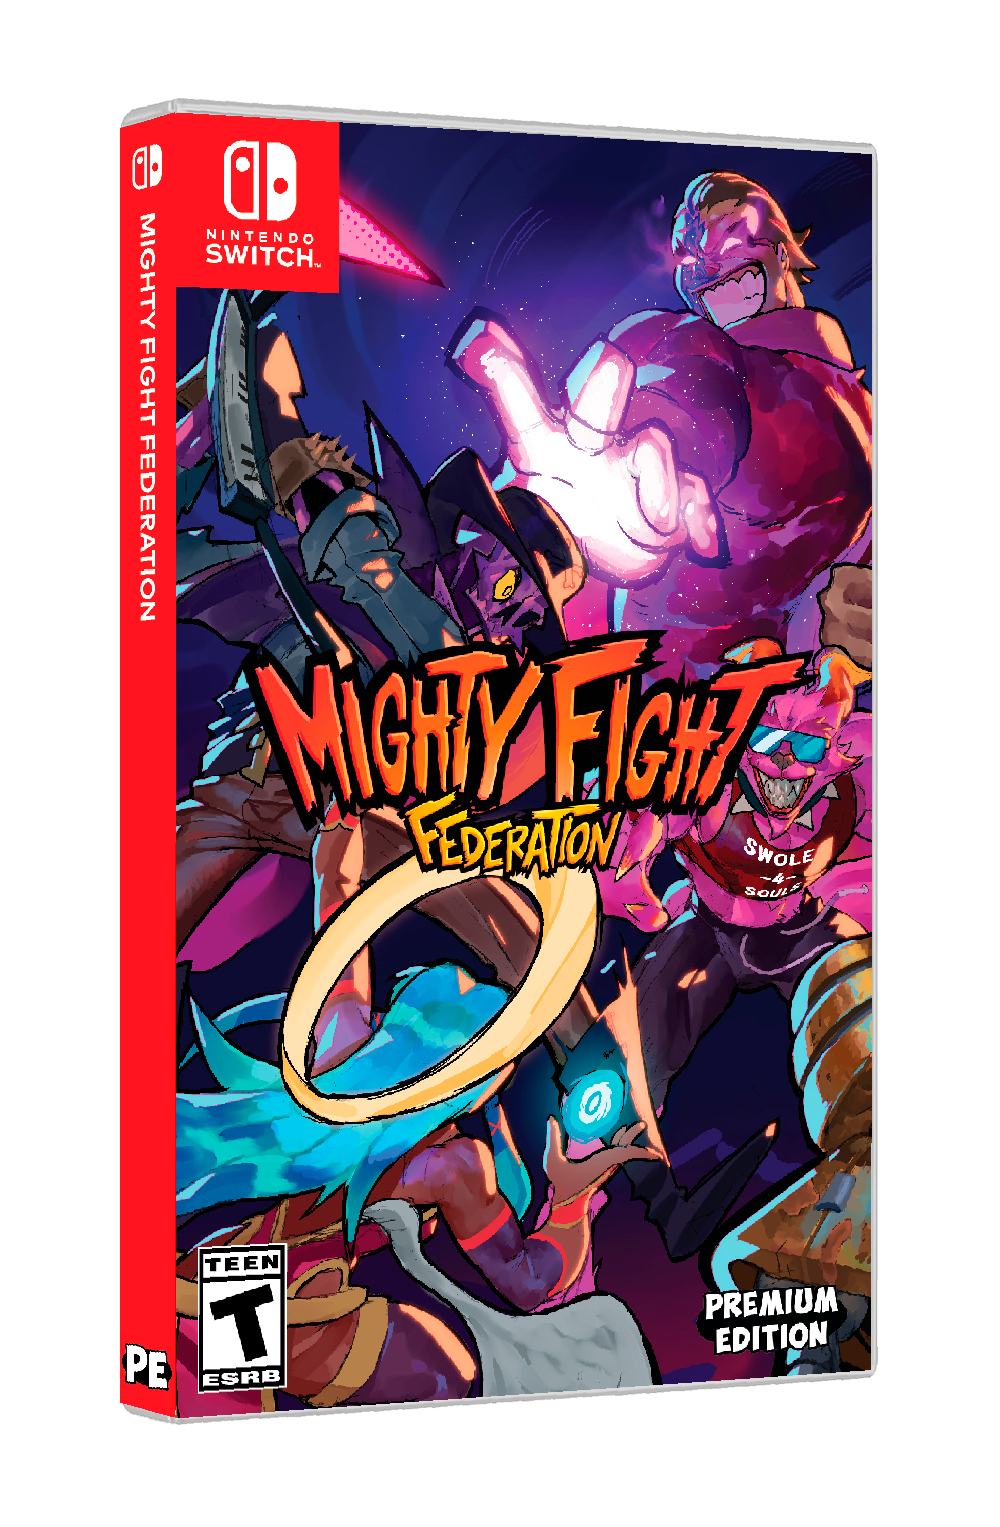 Mighty Fight Federation - Standard Edition